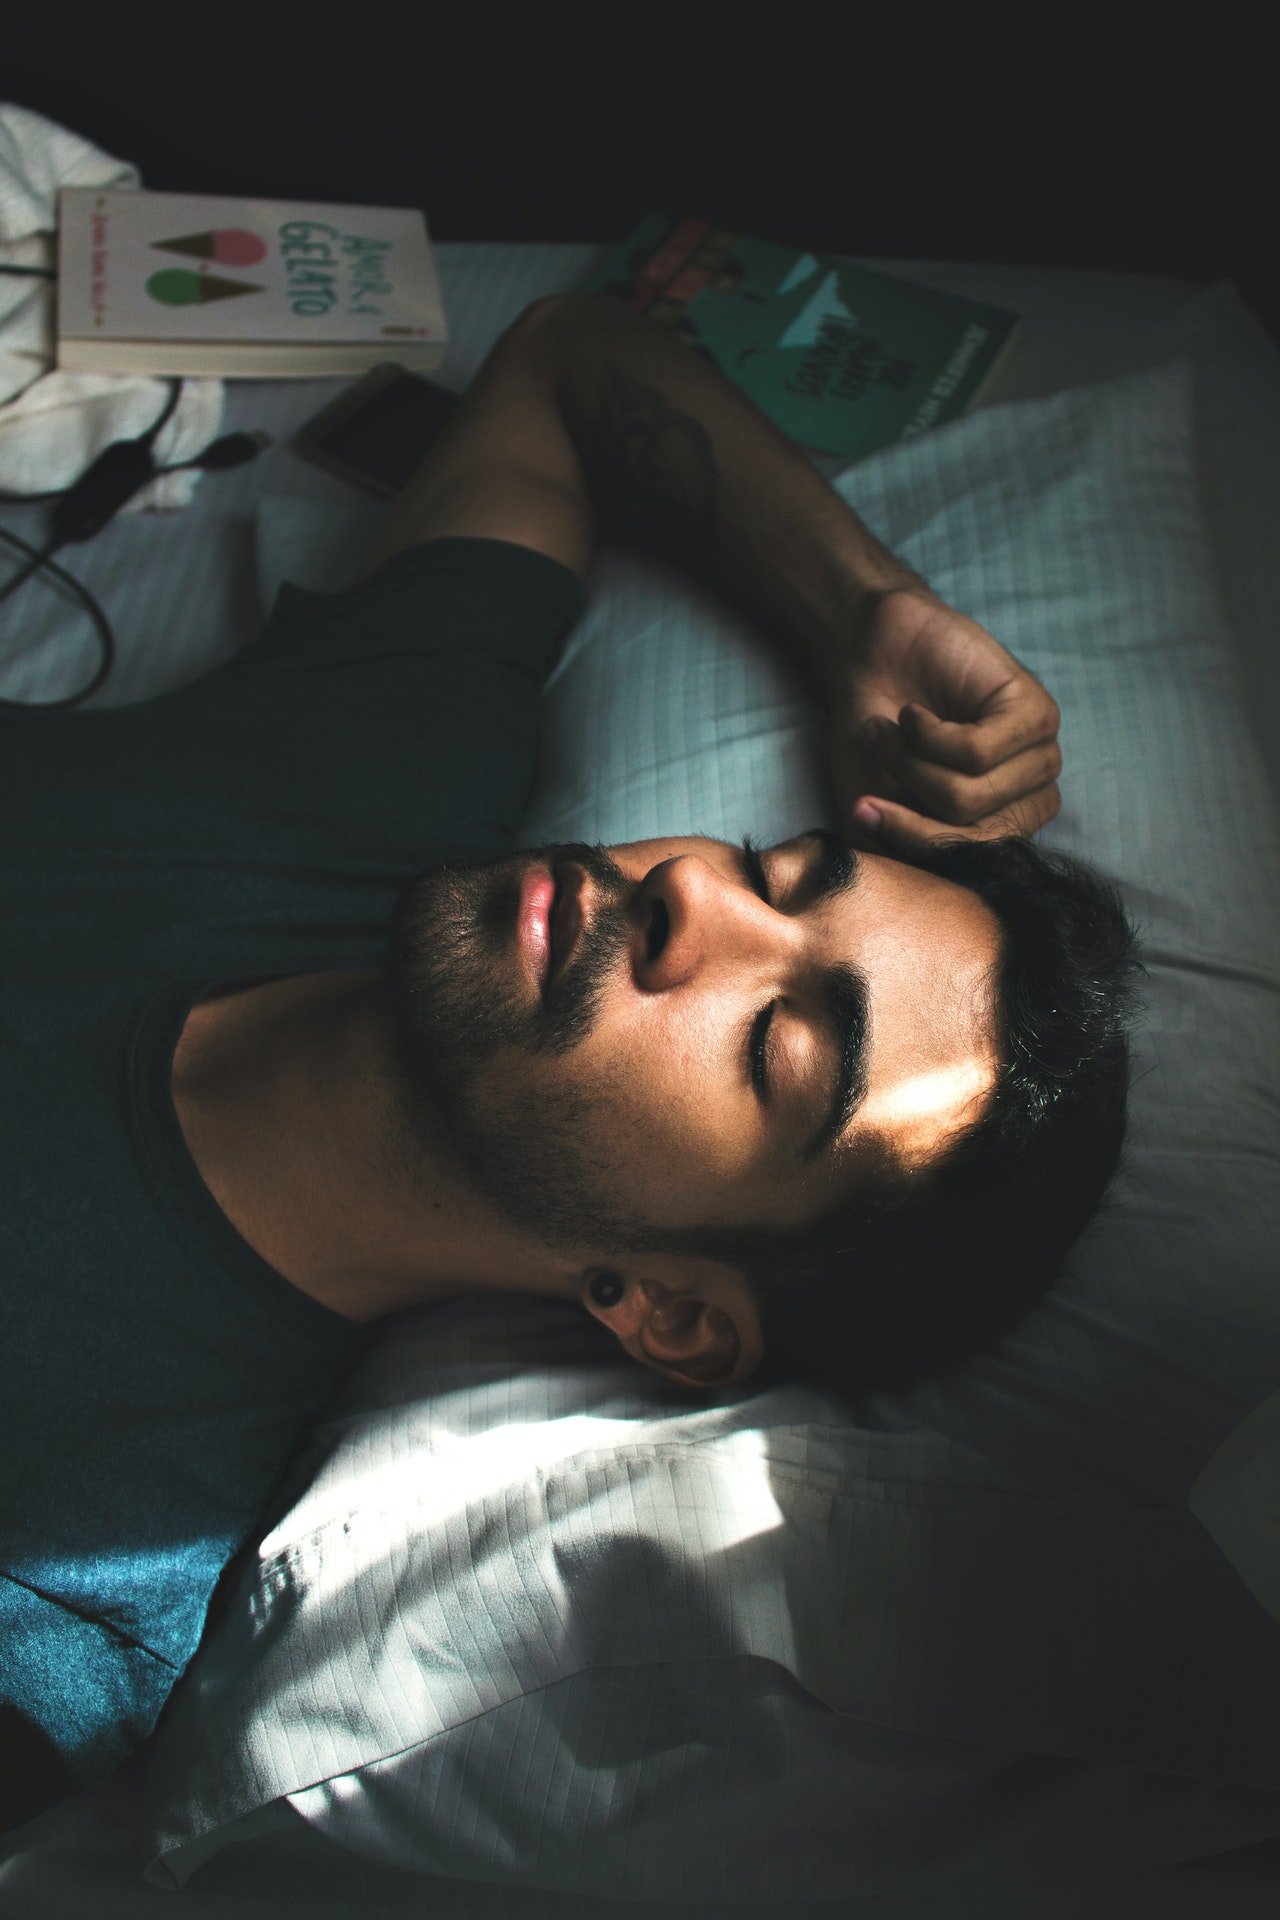 He tried to sleep but kept thinking of Mr. Perkins. | Source: Pexels